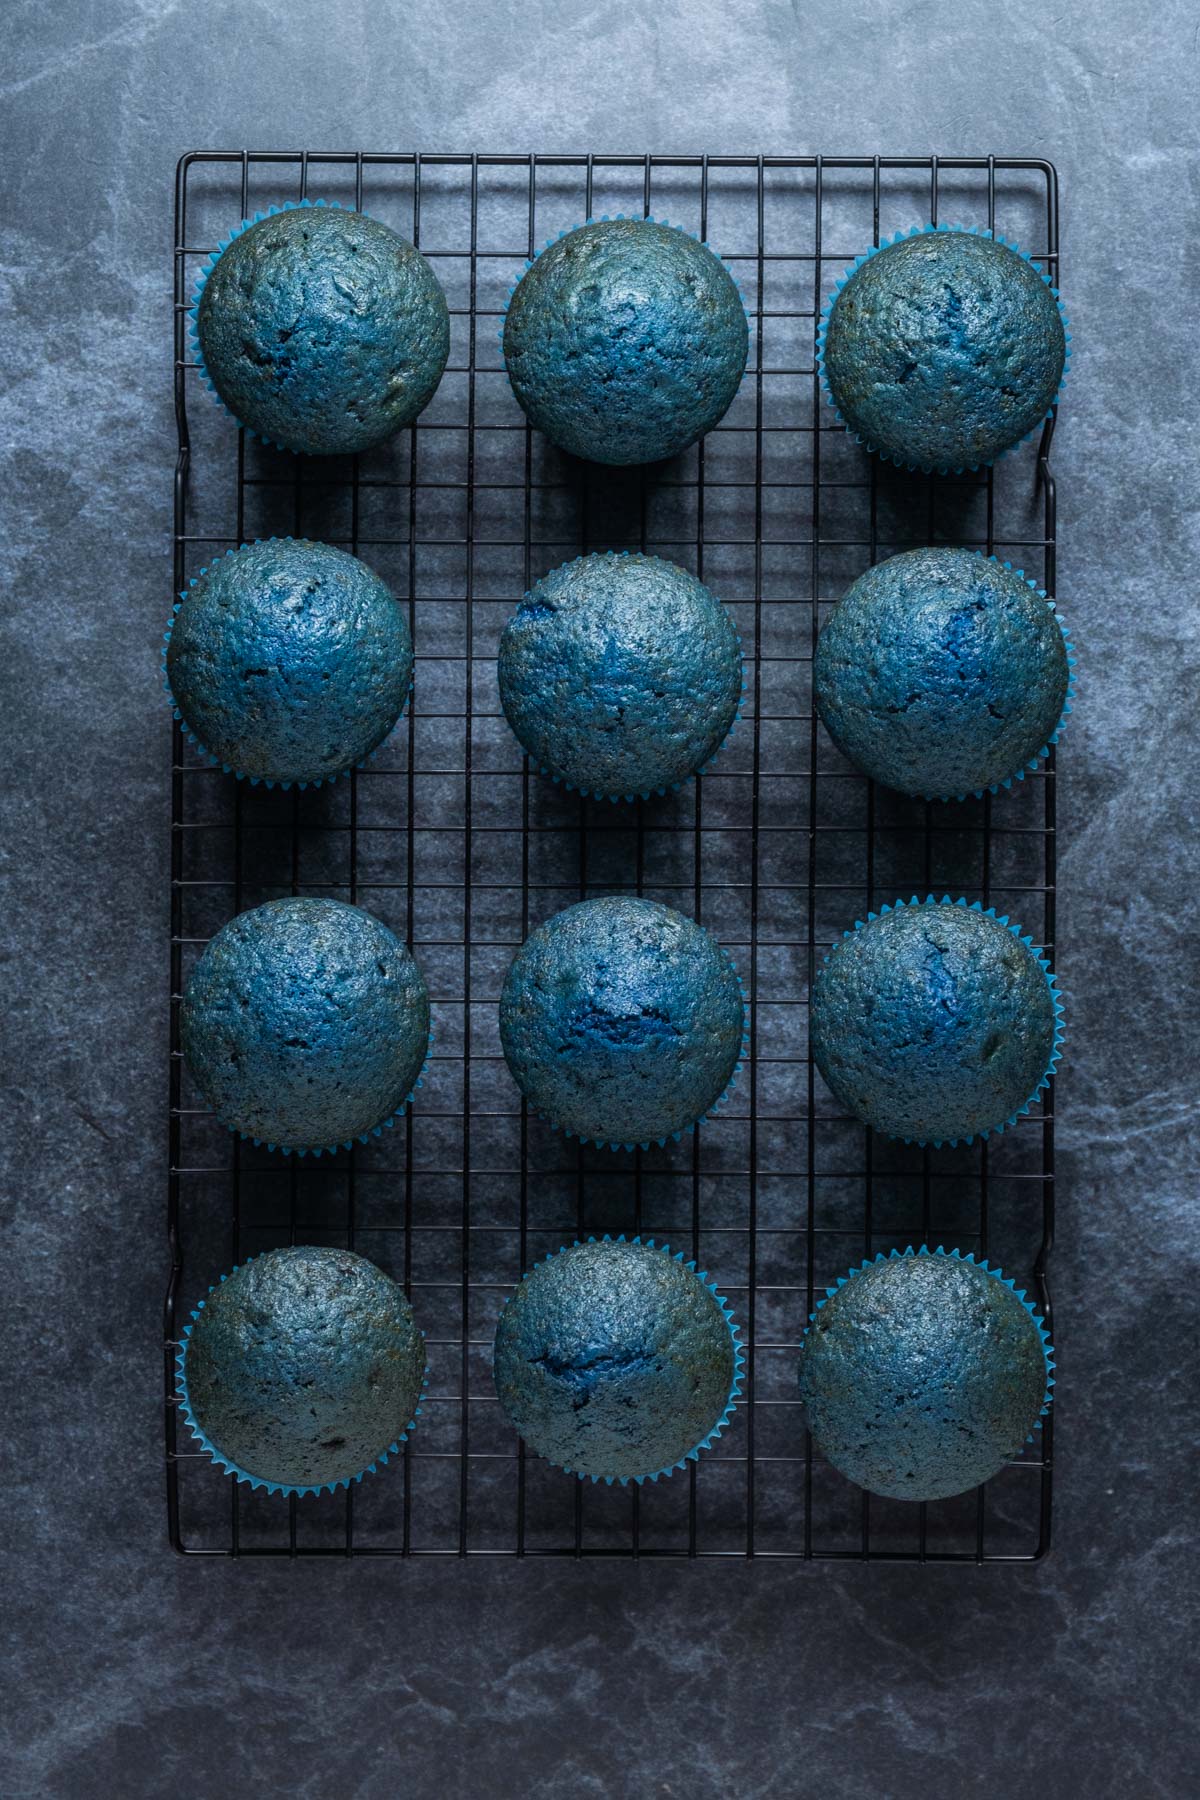 Vegan blue velvet cupcakes cooling on a wire cooling rack.